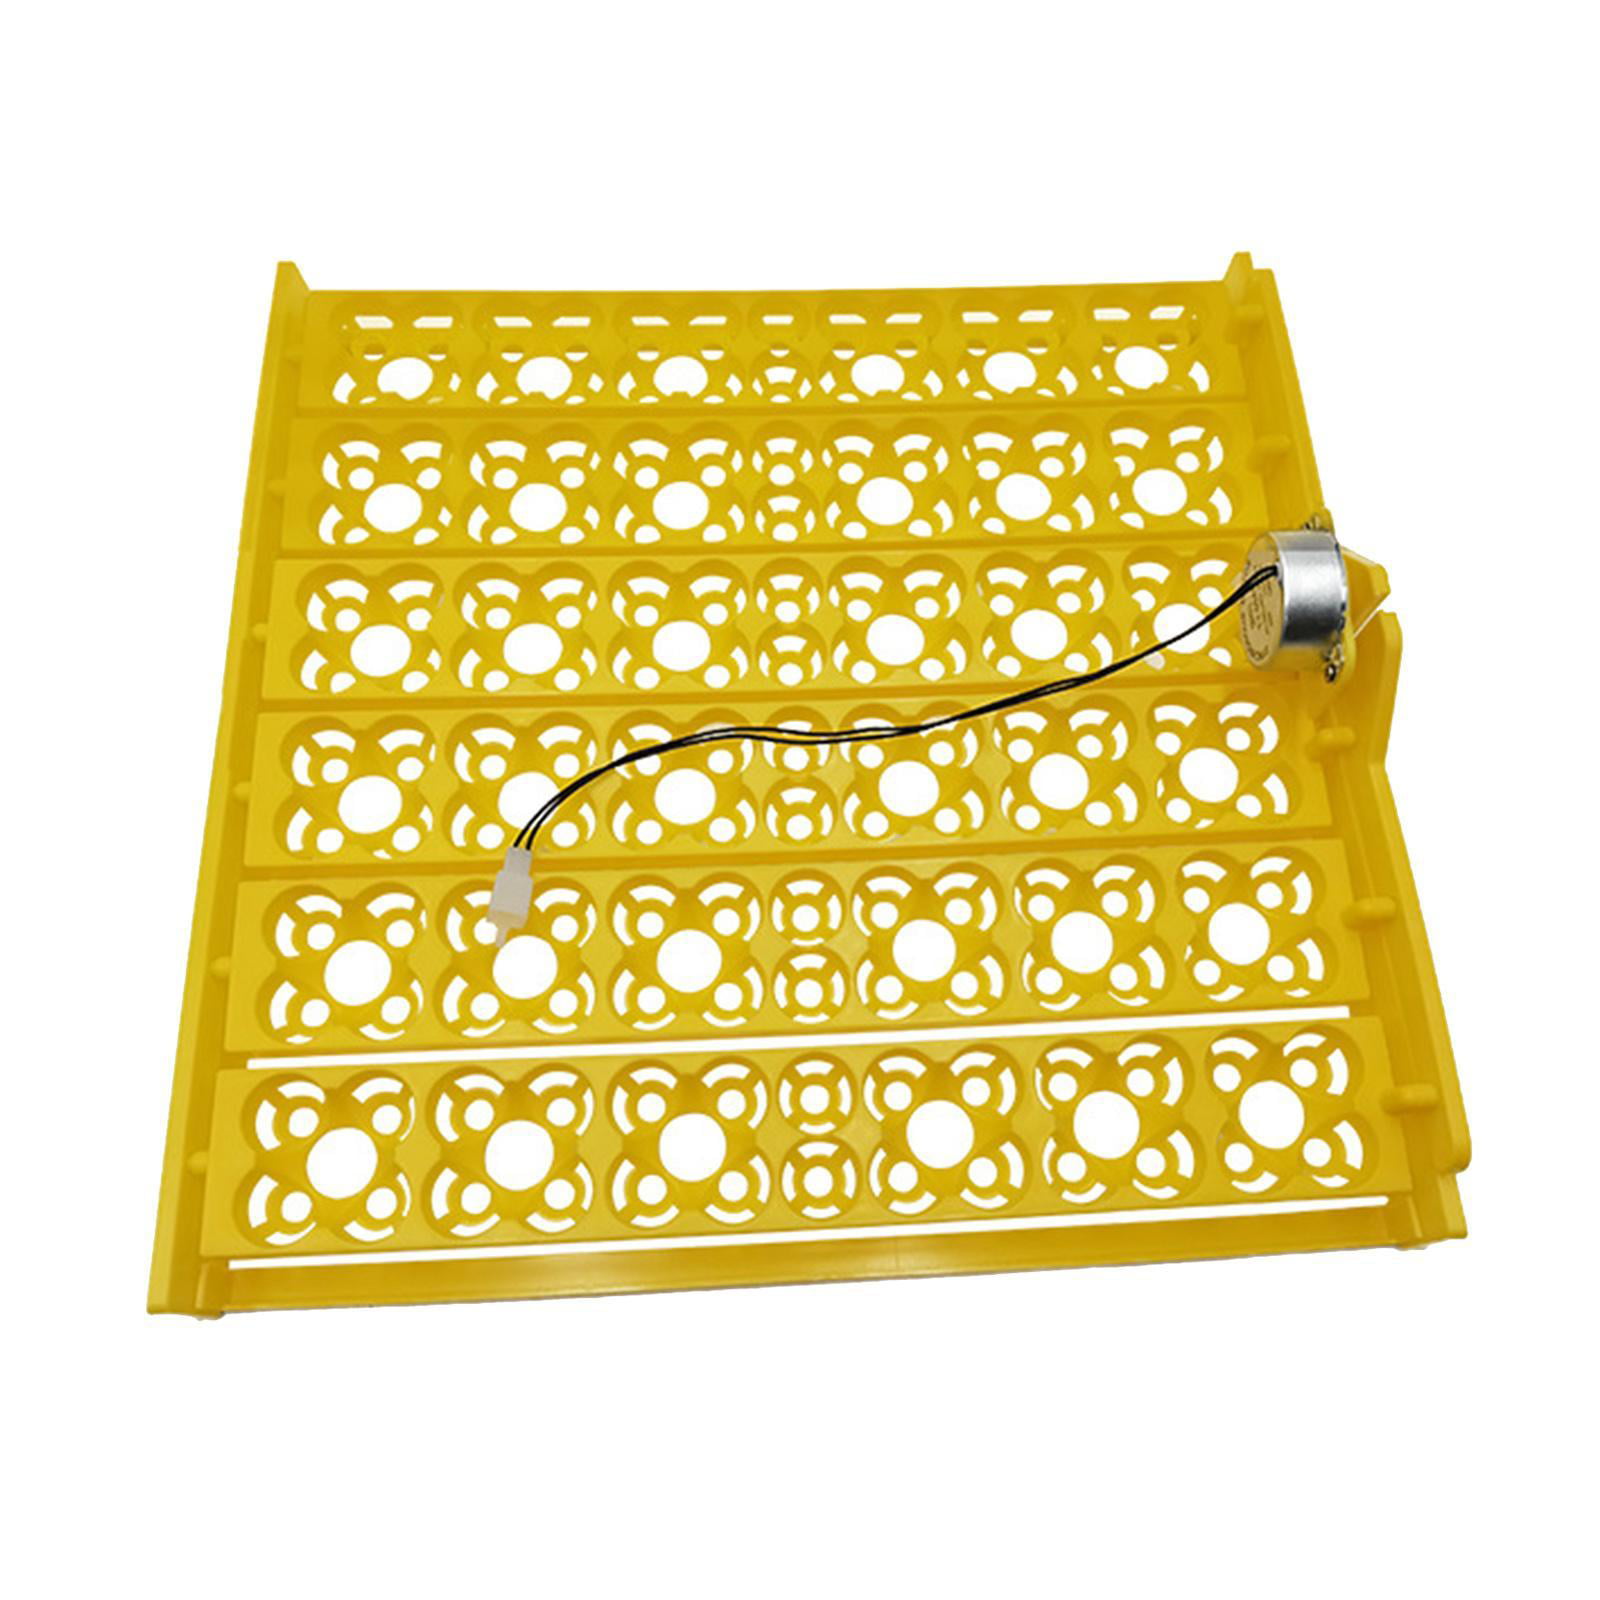 nedenunder værksted lejesoldat Yellow Eggs Incubator Turning Tray with DC 12V Poultry Hatching Device for  36 Chicken Eggs, or 156 Quail Eggs - Walmart.com